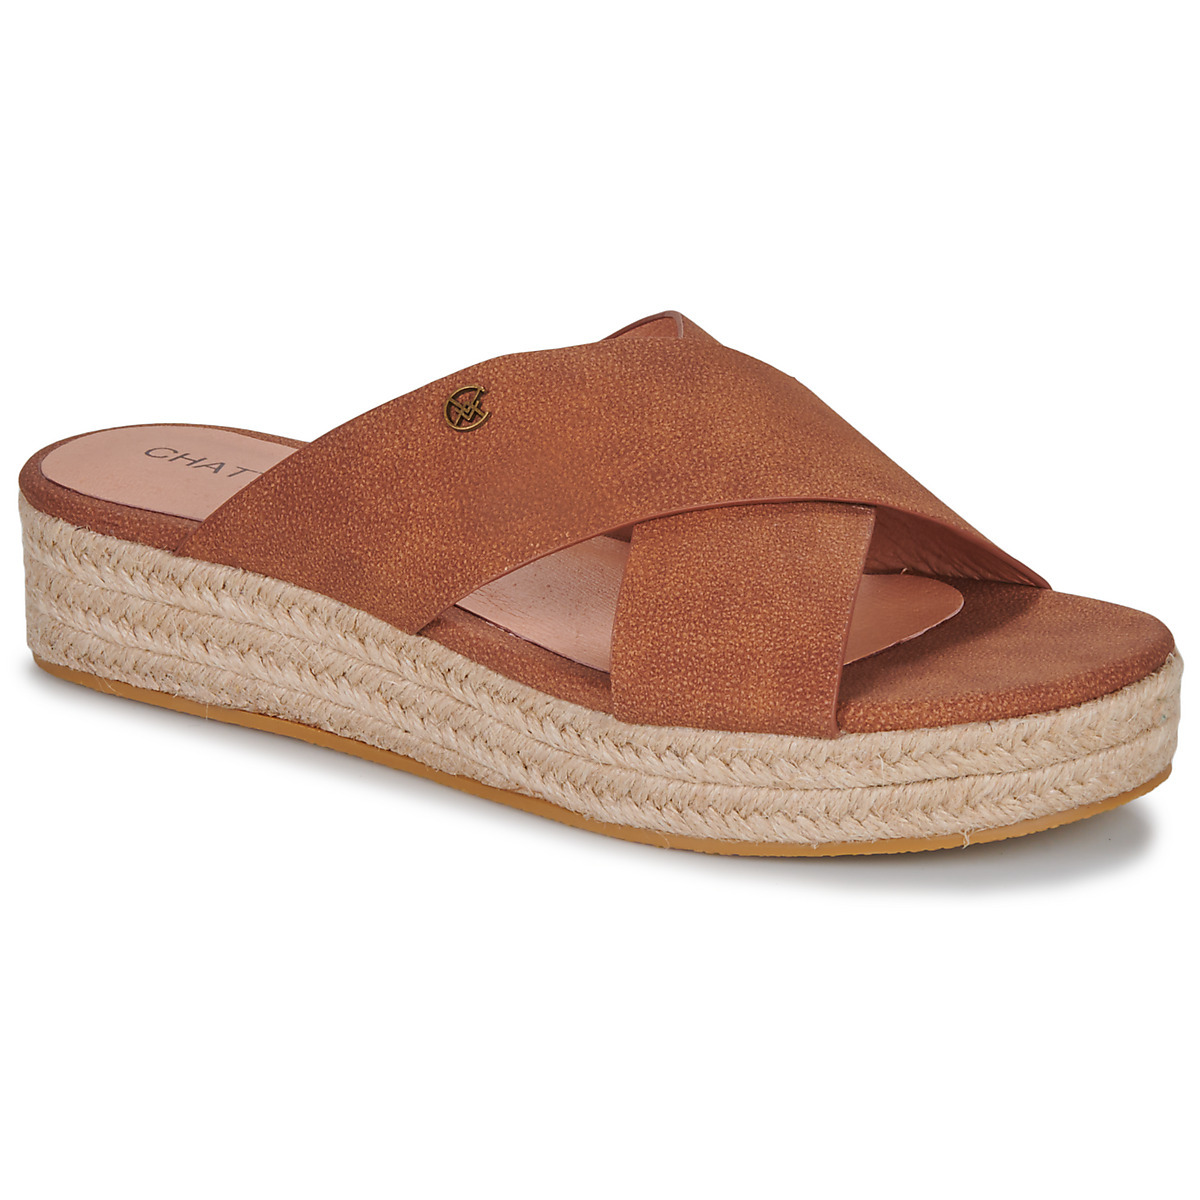 Spartoo - Brown - Womens Slippers GOOFASH